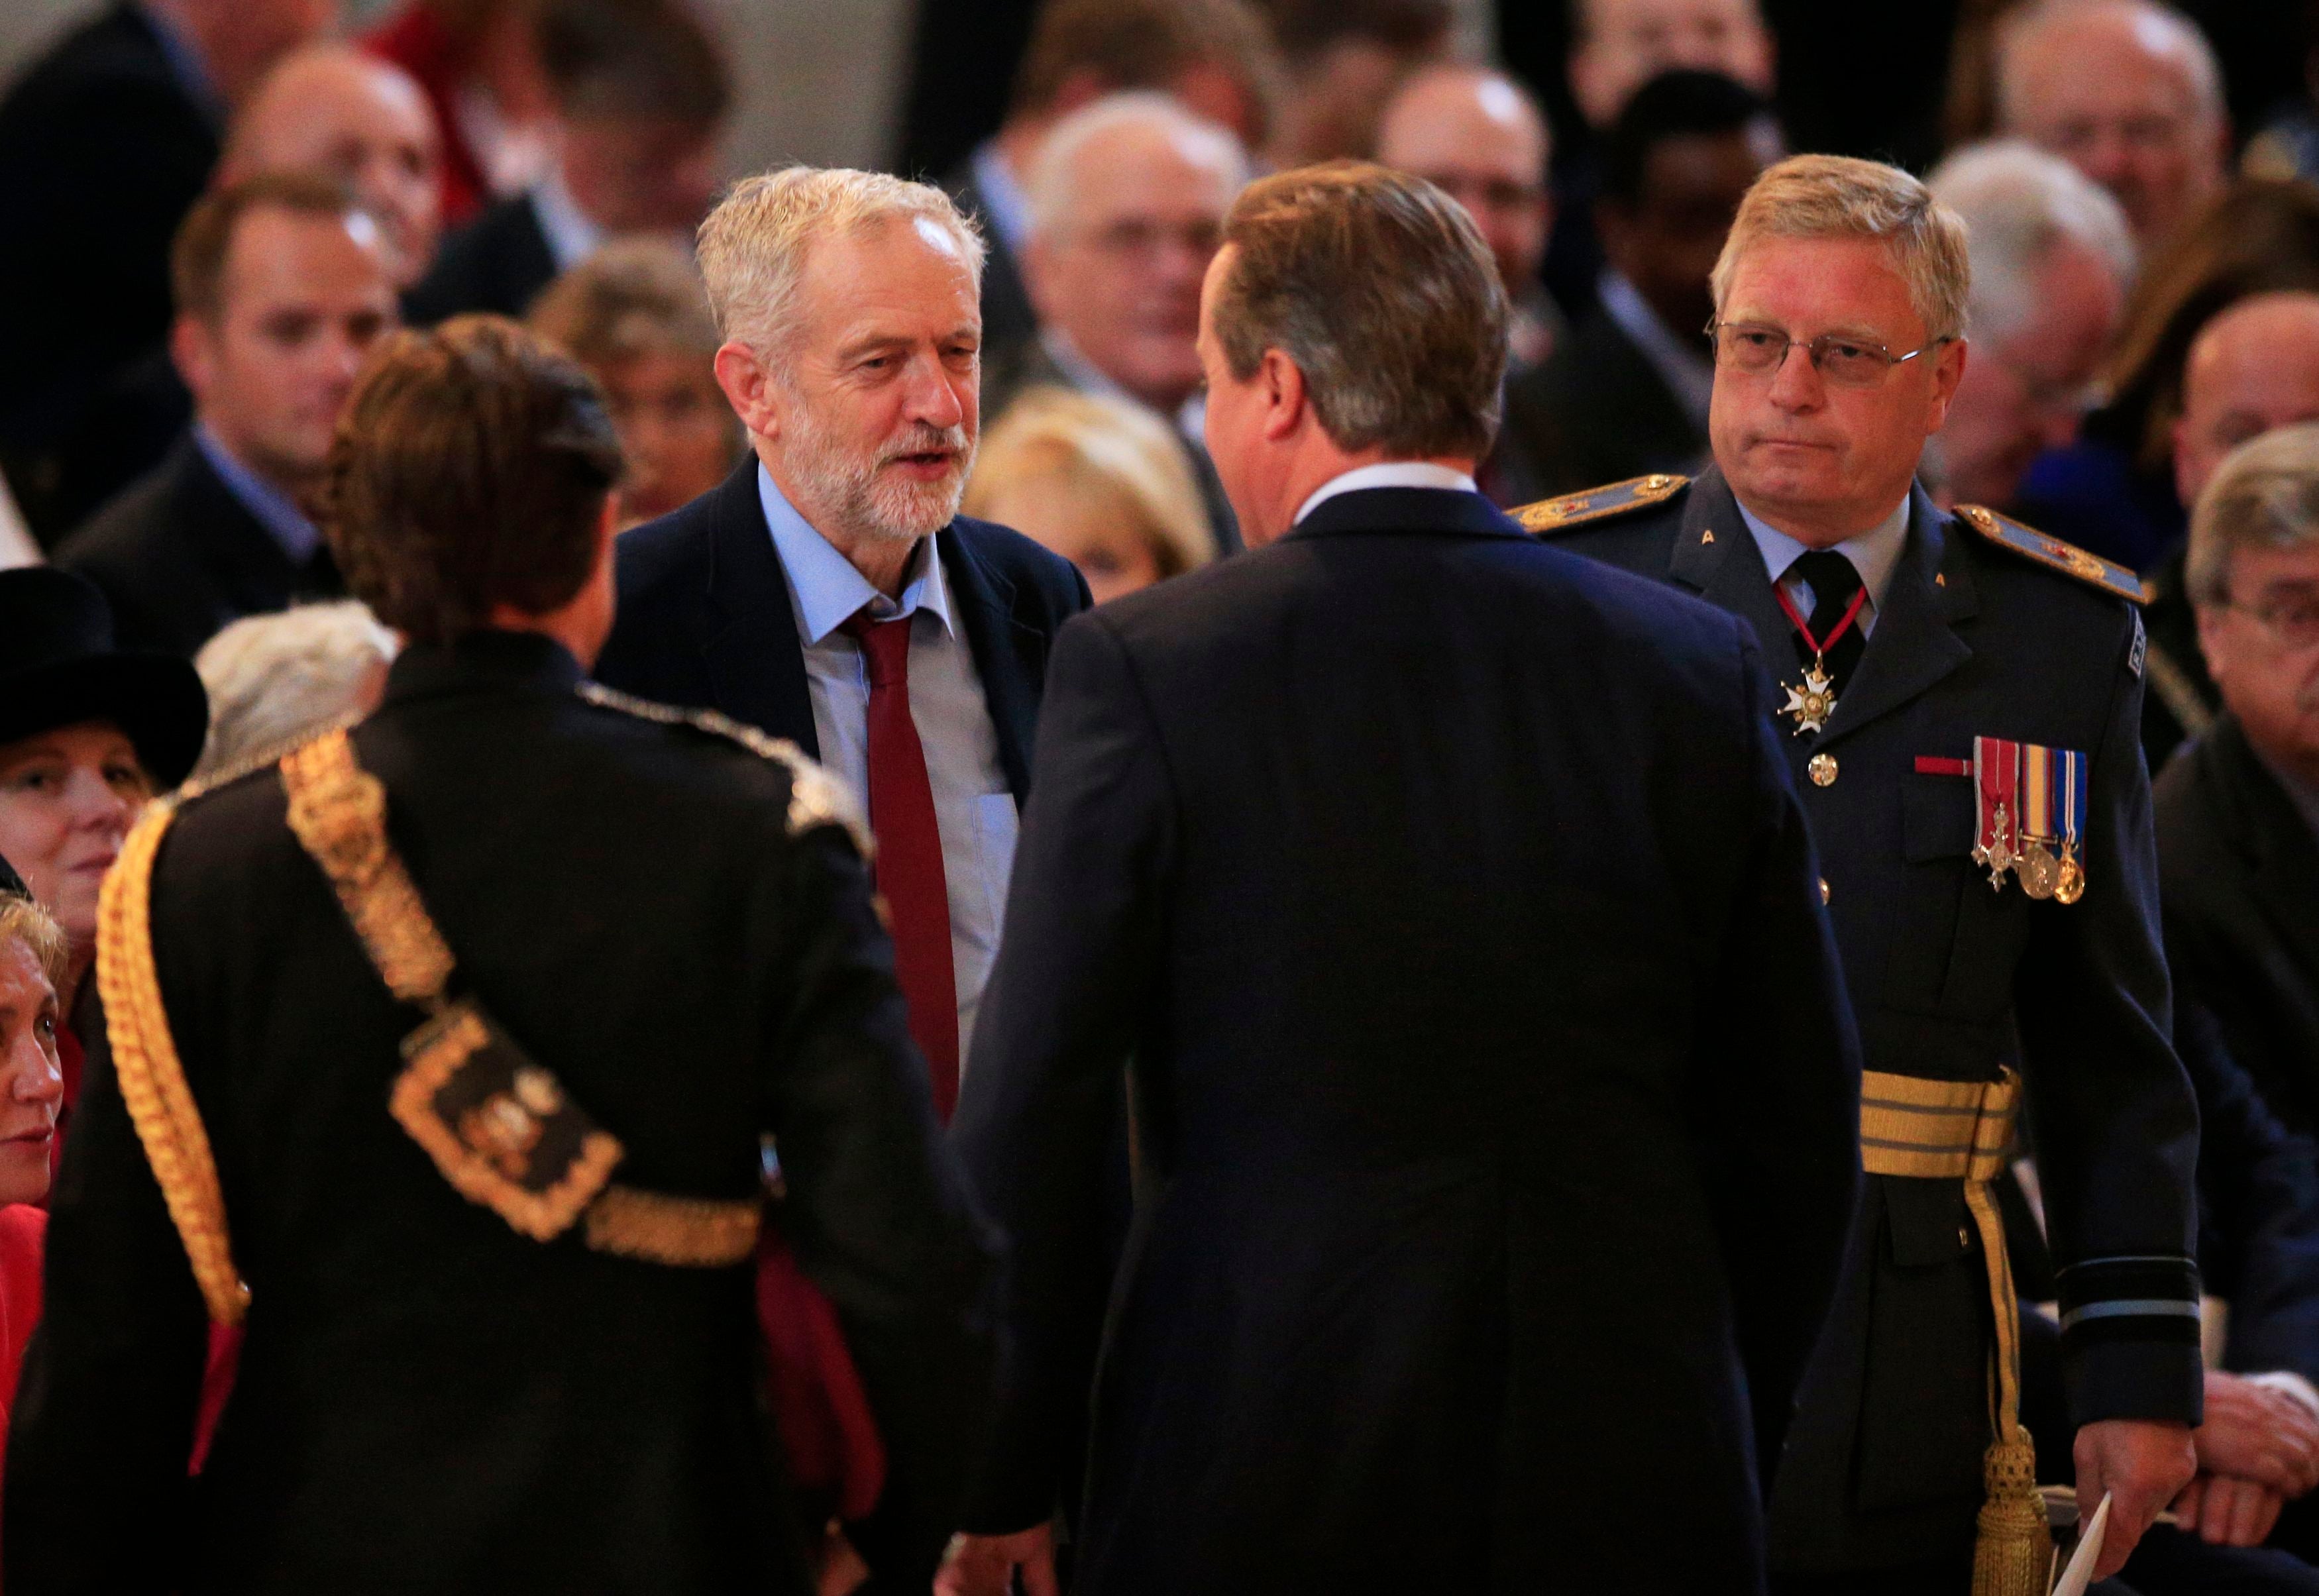 Jeremy Corbyn greets David Cameron for the first time since becoming Labour leader